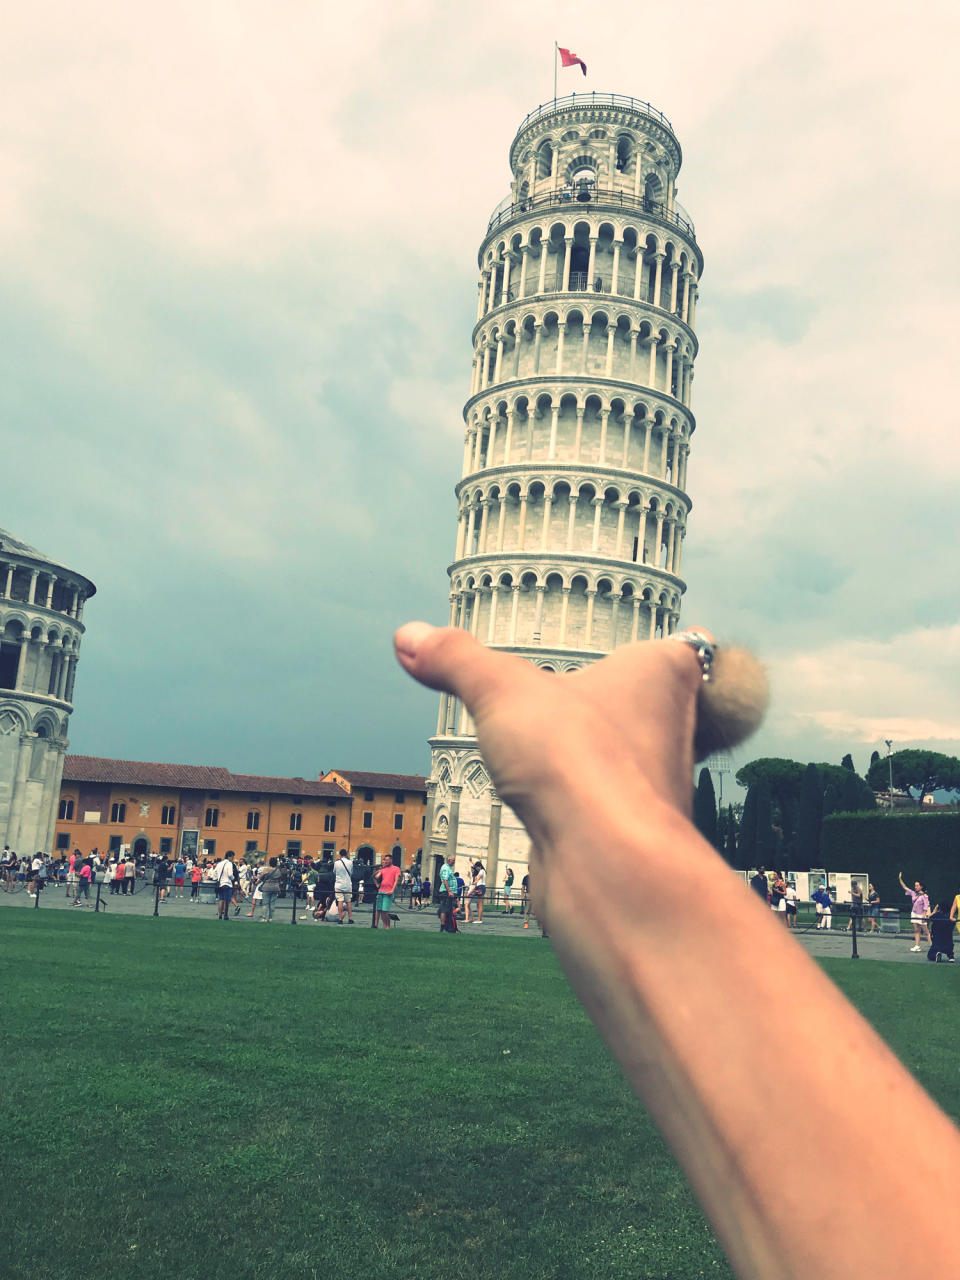 A hand pretending to hold the Leaning Tower of Pisa